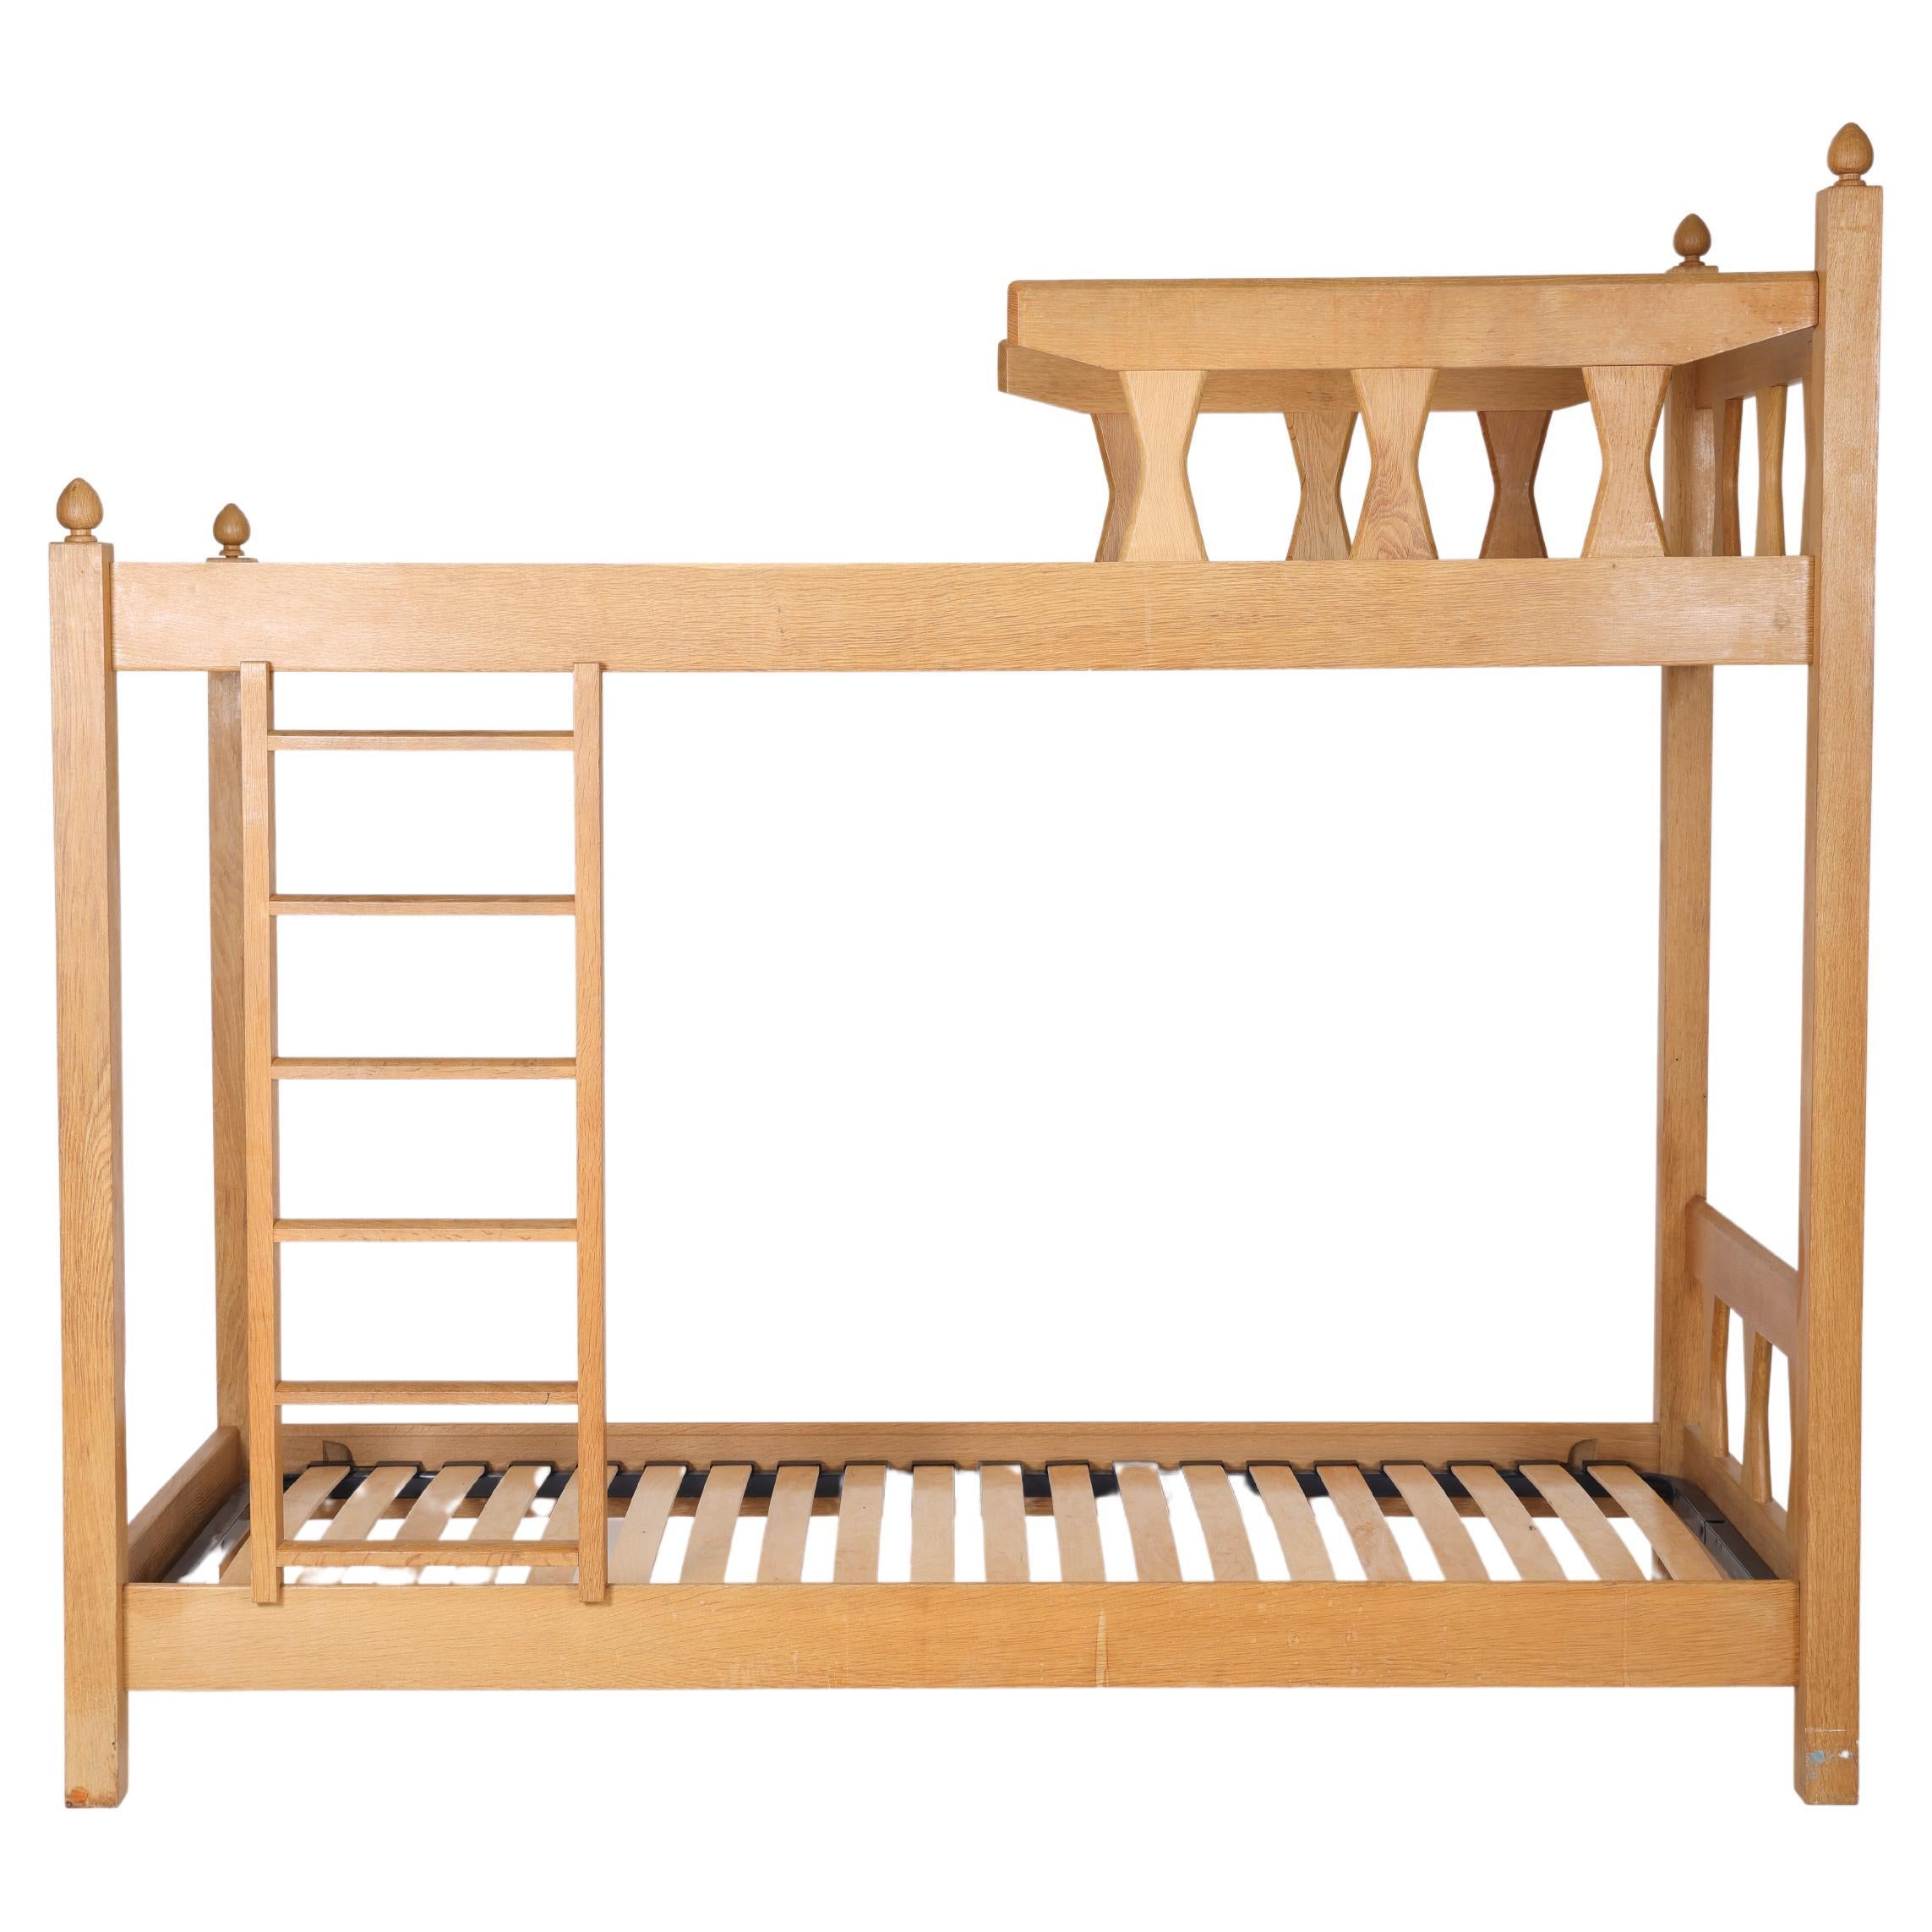 Solid wood bunk bed by Guillerme and Chambron for Votre Maison. Two single beds stacked in solid oak, with an open panel at the headboard and a movable ladder. Very good condition.
LP700/701.